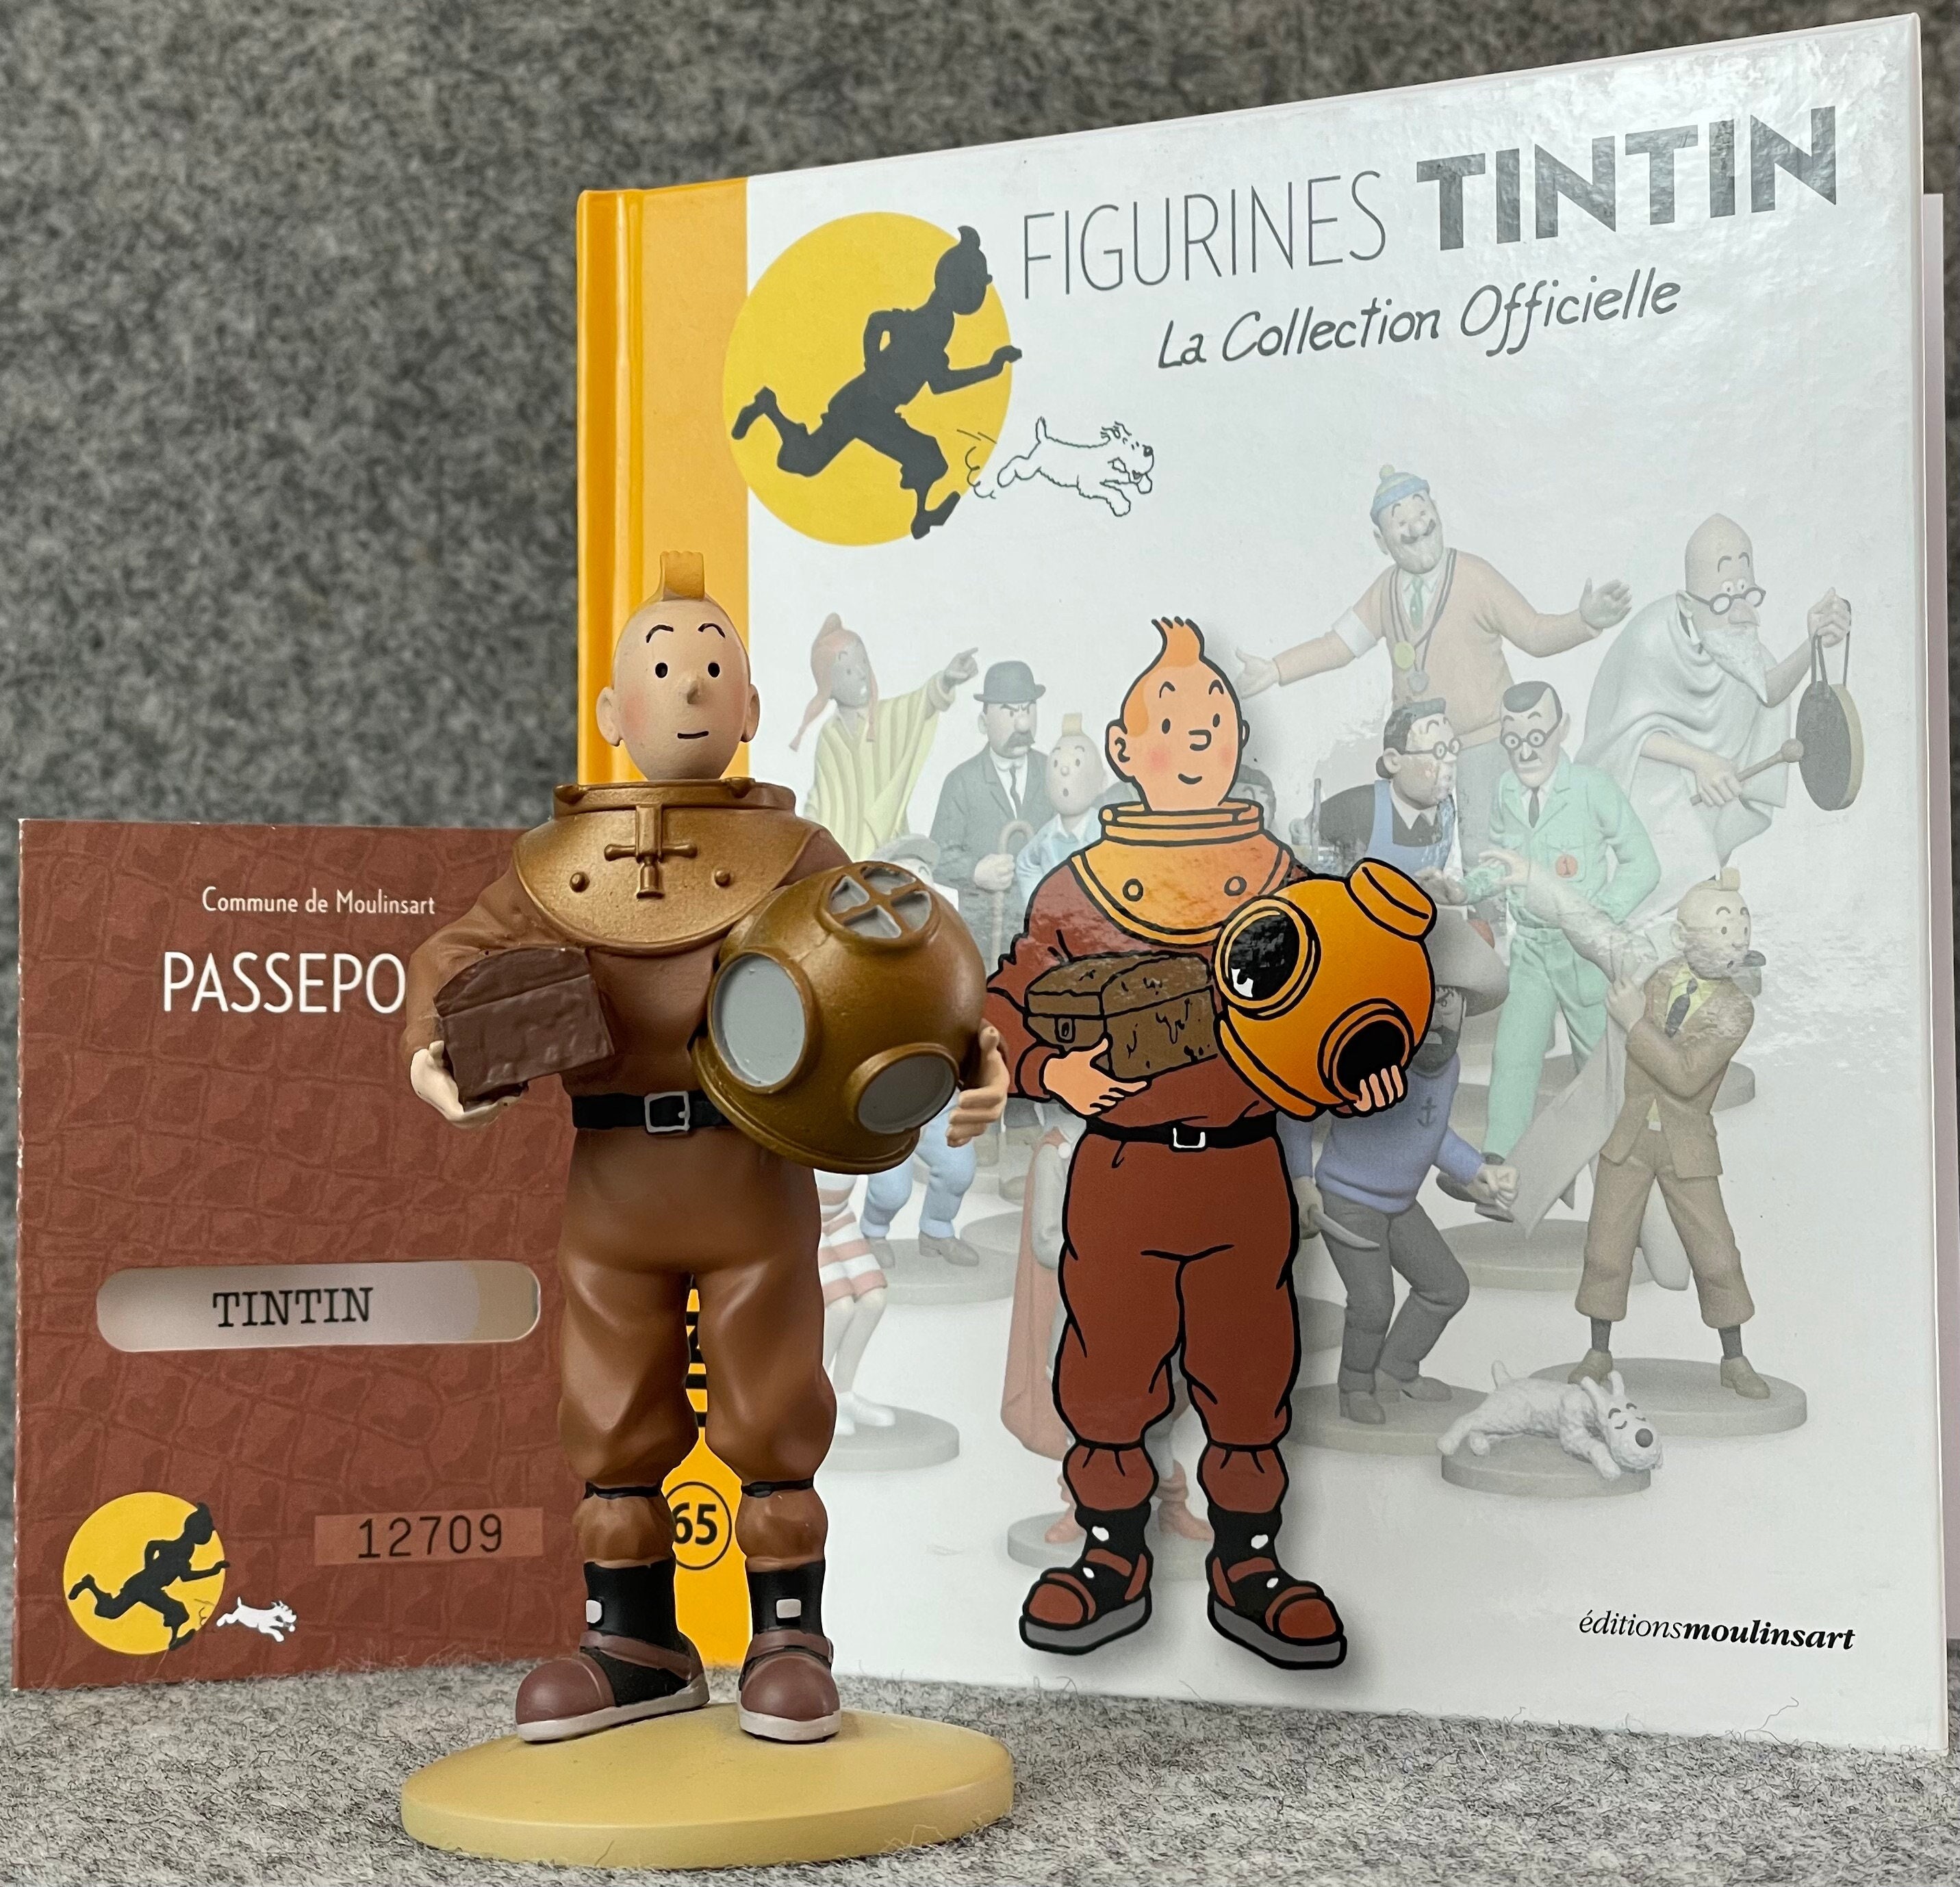 Figurine Tintin collection officielle